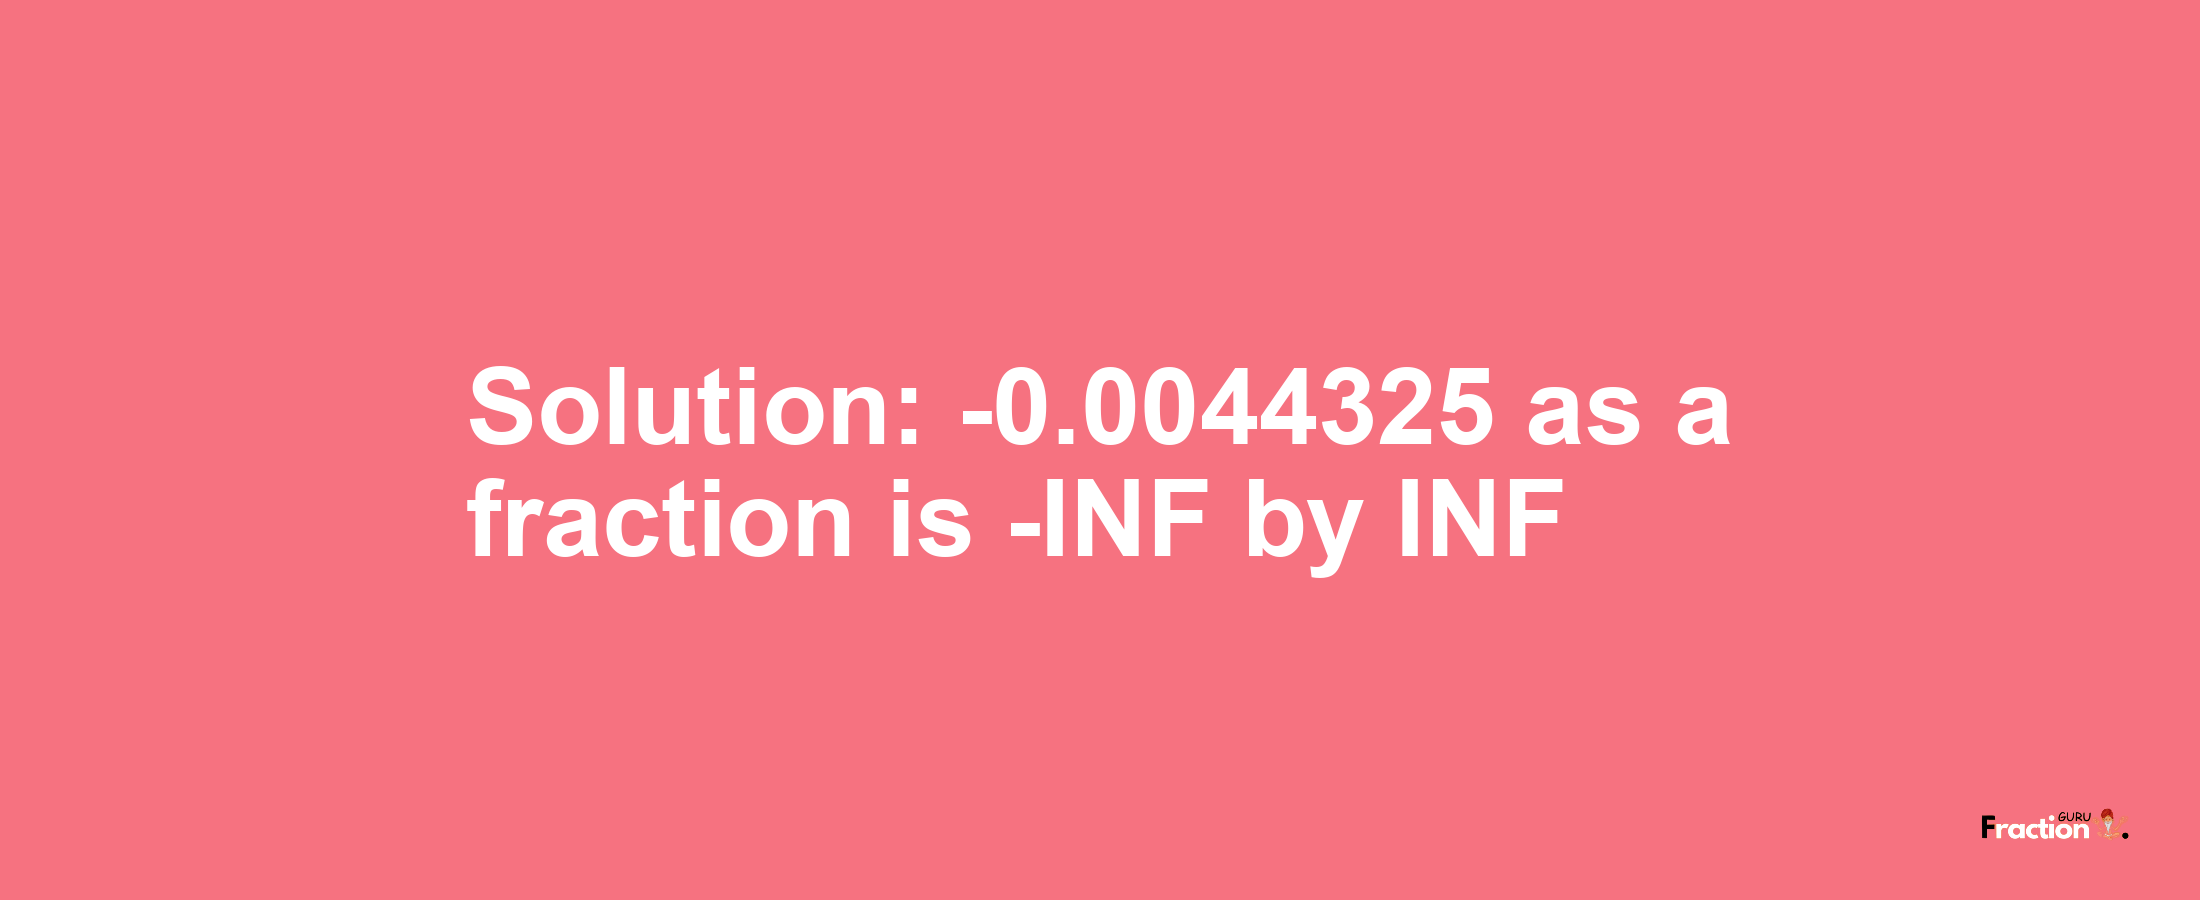 Solution:-0.0044325 as a fraction is -INF/INF